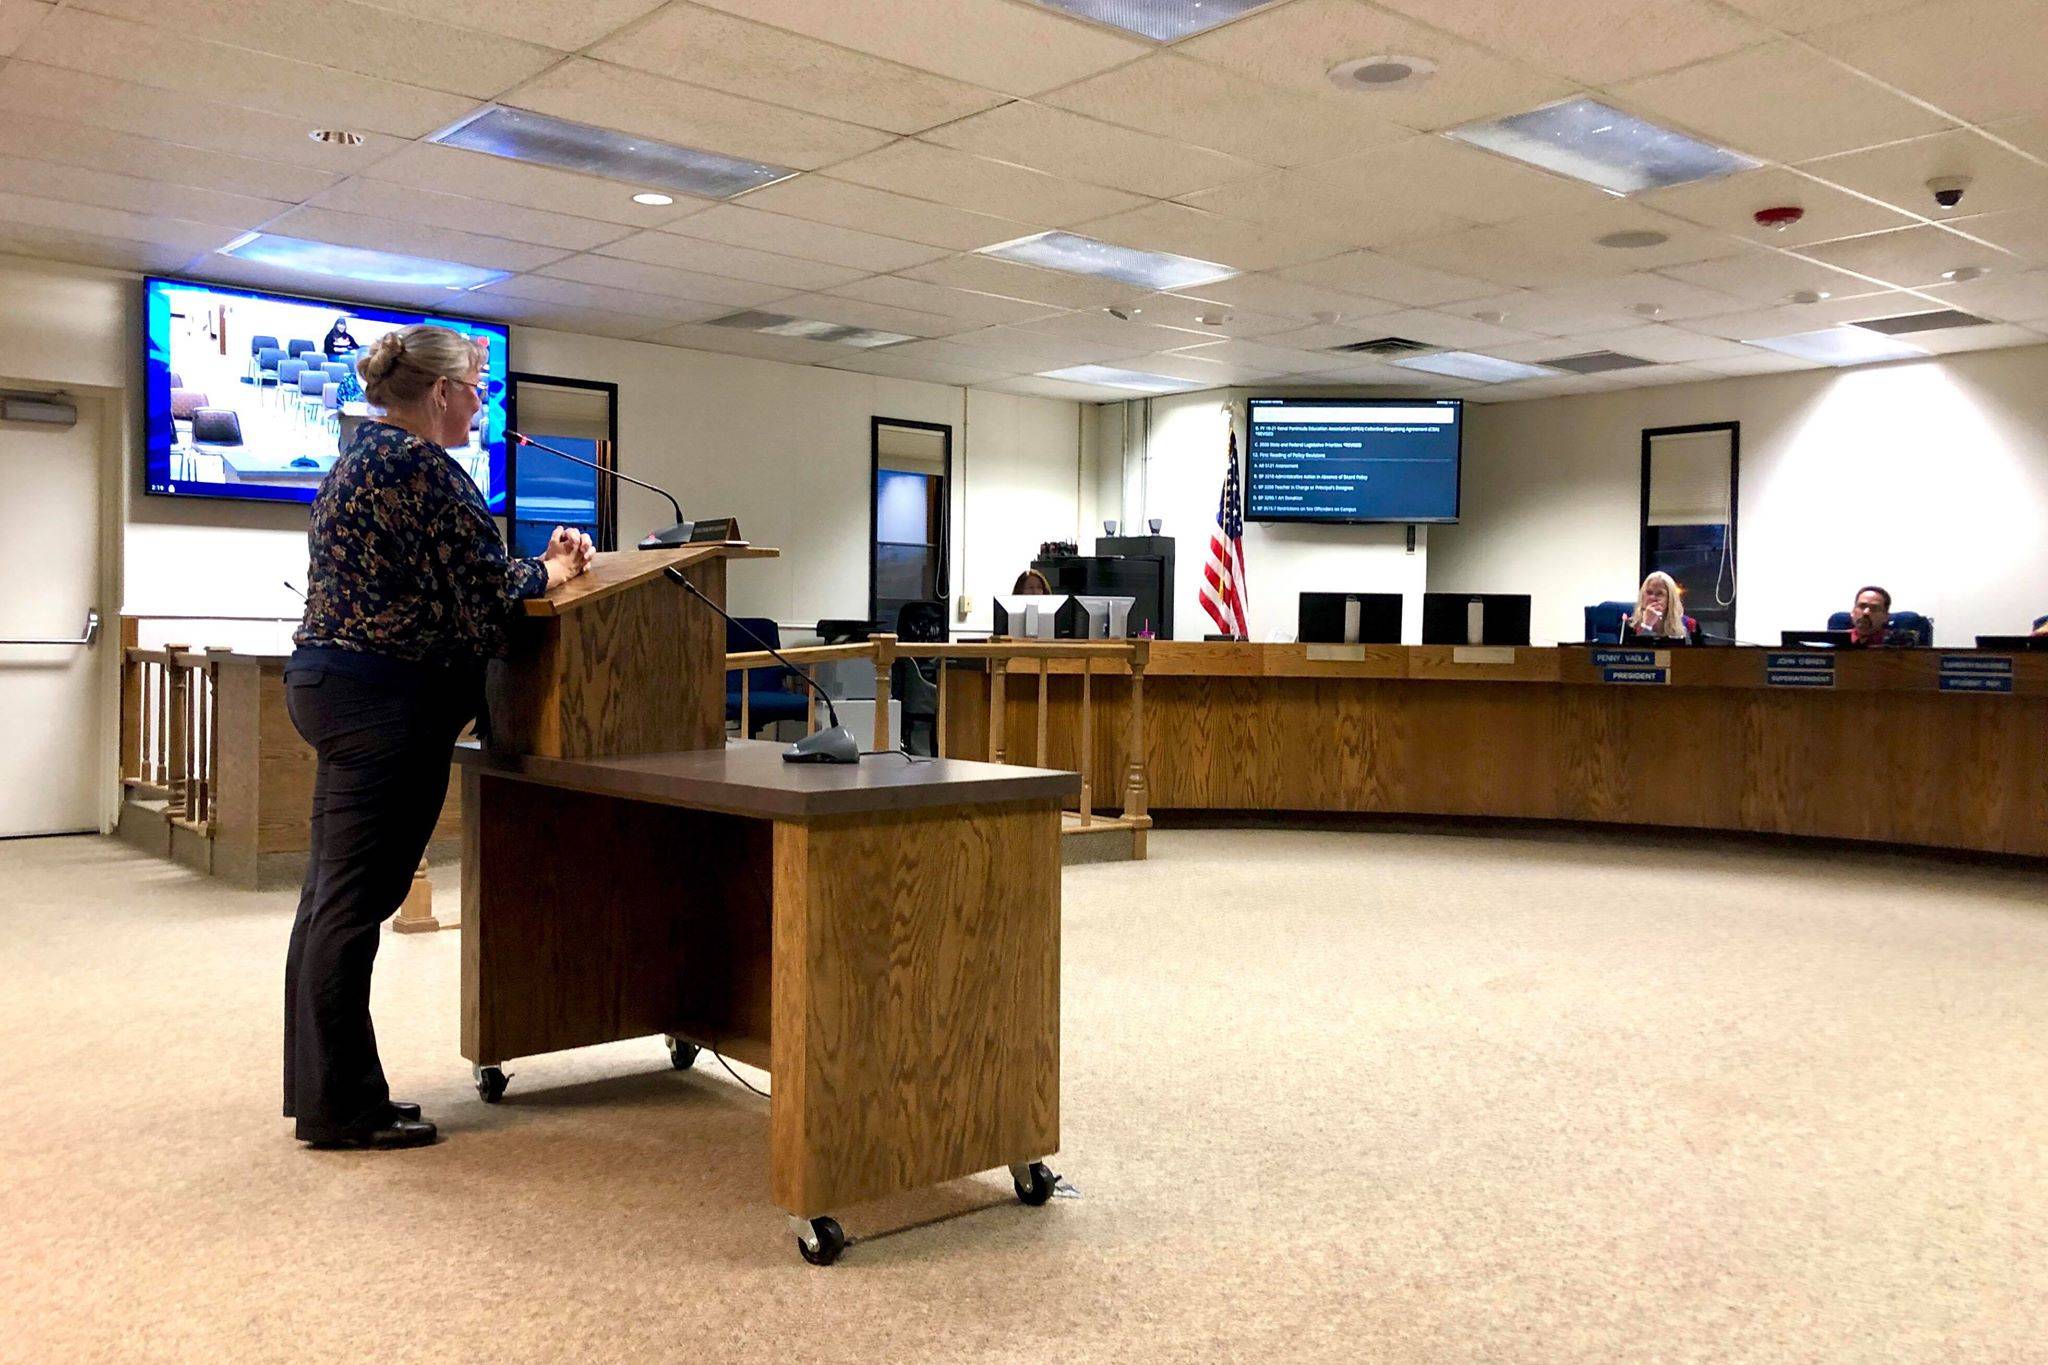 Kenai Peninsula Education Support Association Anne McCabe speaks to the Kenai Peninsula Borough School District Board of Education in support of approving employee contracts negotiated last month, Monday, Oct. 7, 2019, in Soldotna, Alaska. (Photo by Victoria Petersen/Peninsula Clarion)